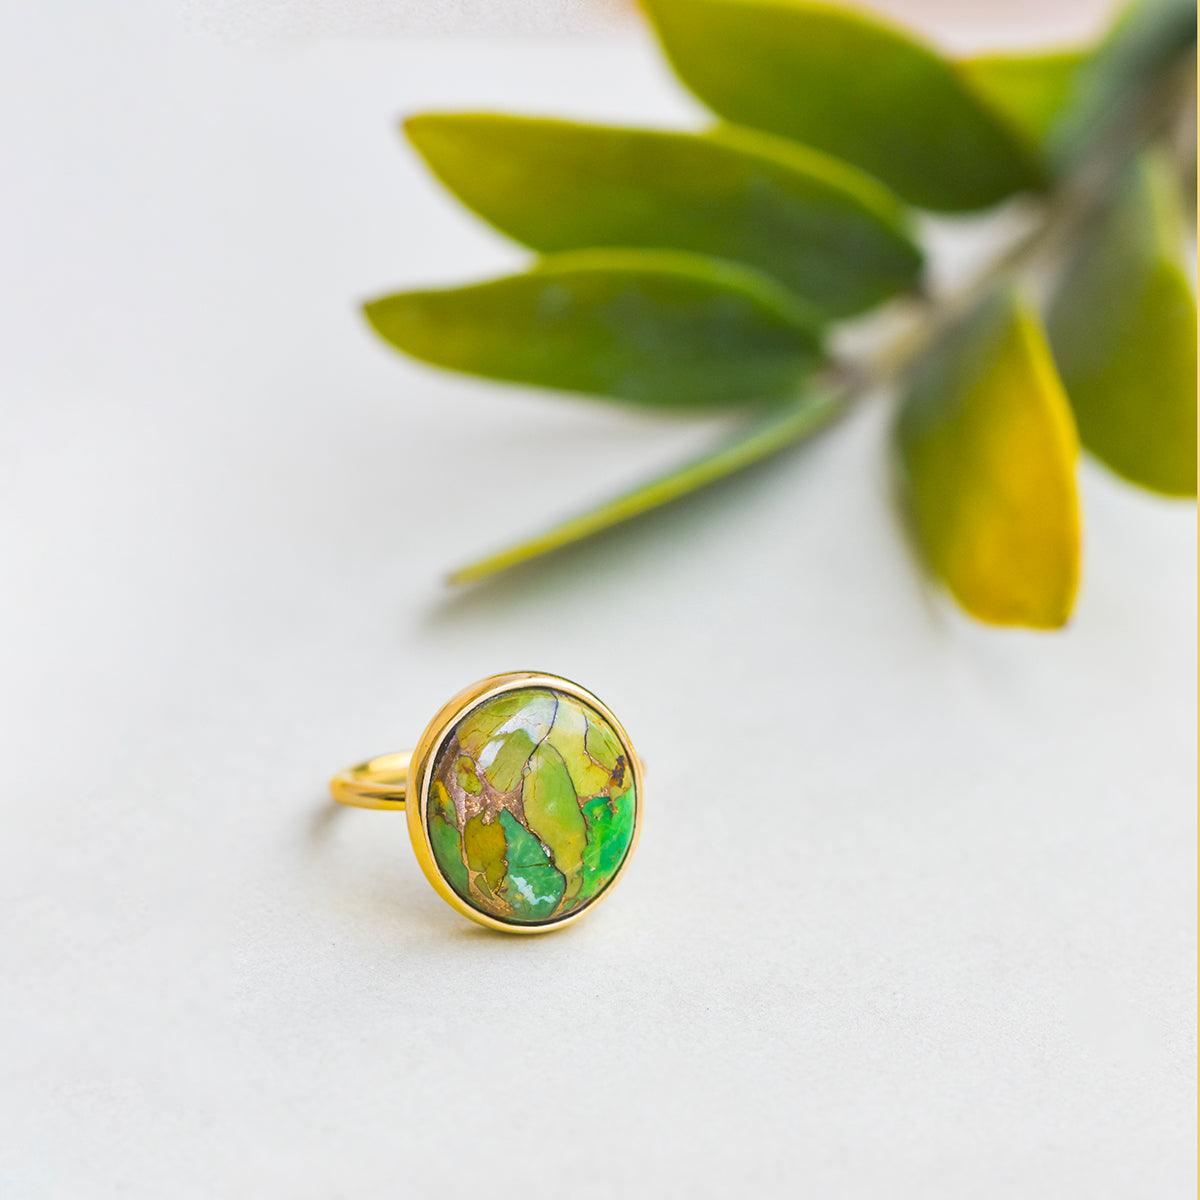 Green Copper Turquoise Solitaire Ring 14k Gold Over 925 Silver - YoTreasure